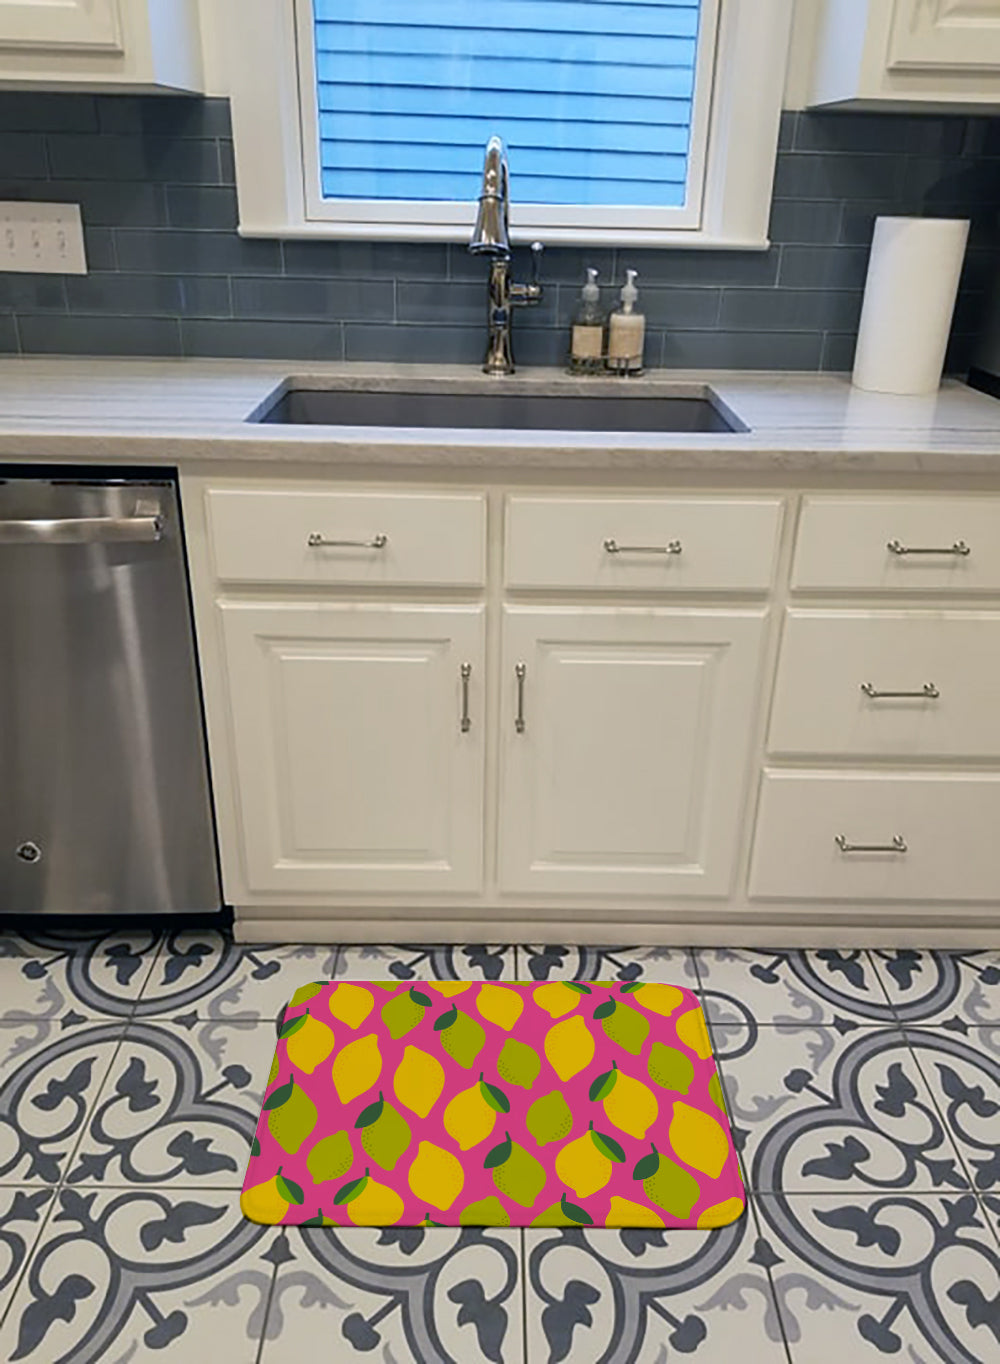 Lemons and Limes on Pink Machine Washable Memory Foam Mat BB5143RUG - the-store.com